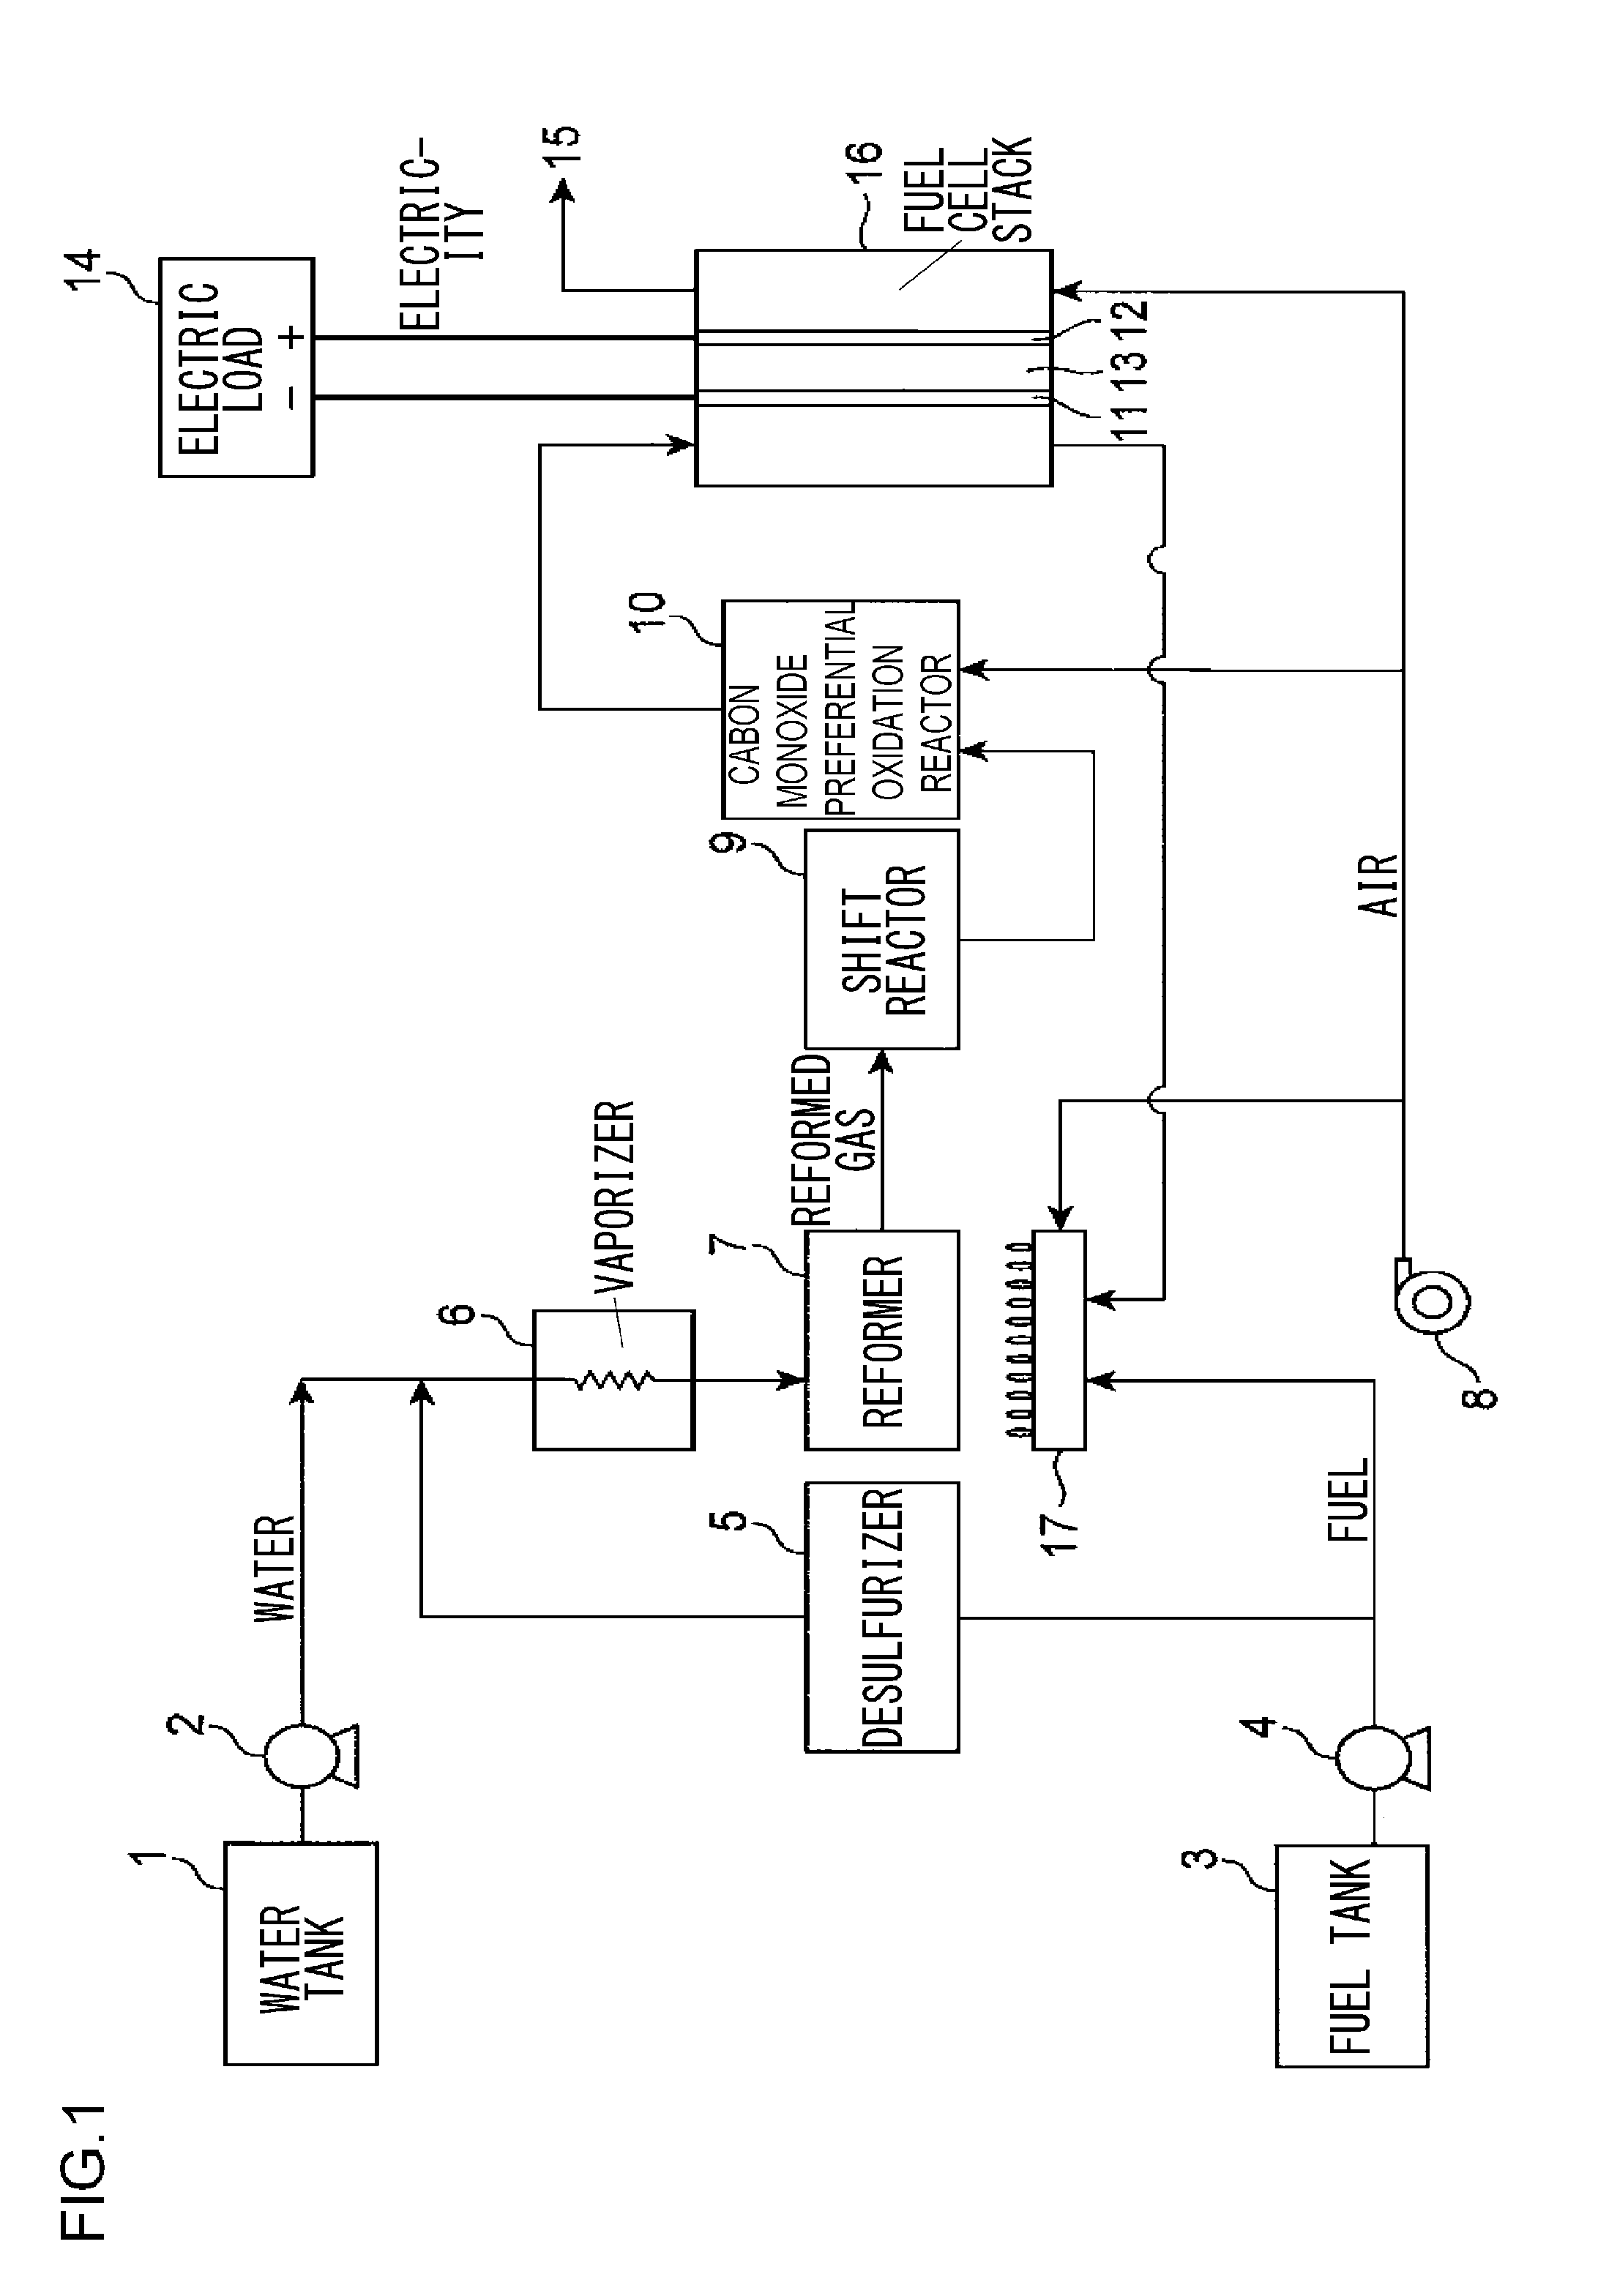 Precursor of desulfurizing agent for hydrocarbon and manufacturing method thereof, calcined precursor of desulfurizing agent for hydrocarbon and manufacturing method thereof, desulfurizing agent for hydrocarbon and manufacturing method thereof, hydrocarbon desulfurization method, and fuel cell system